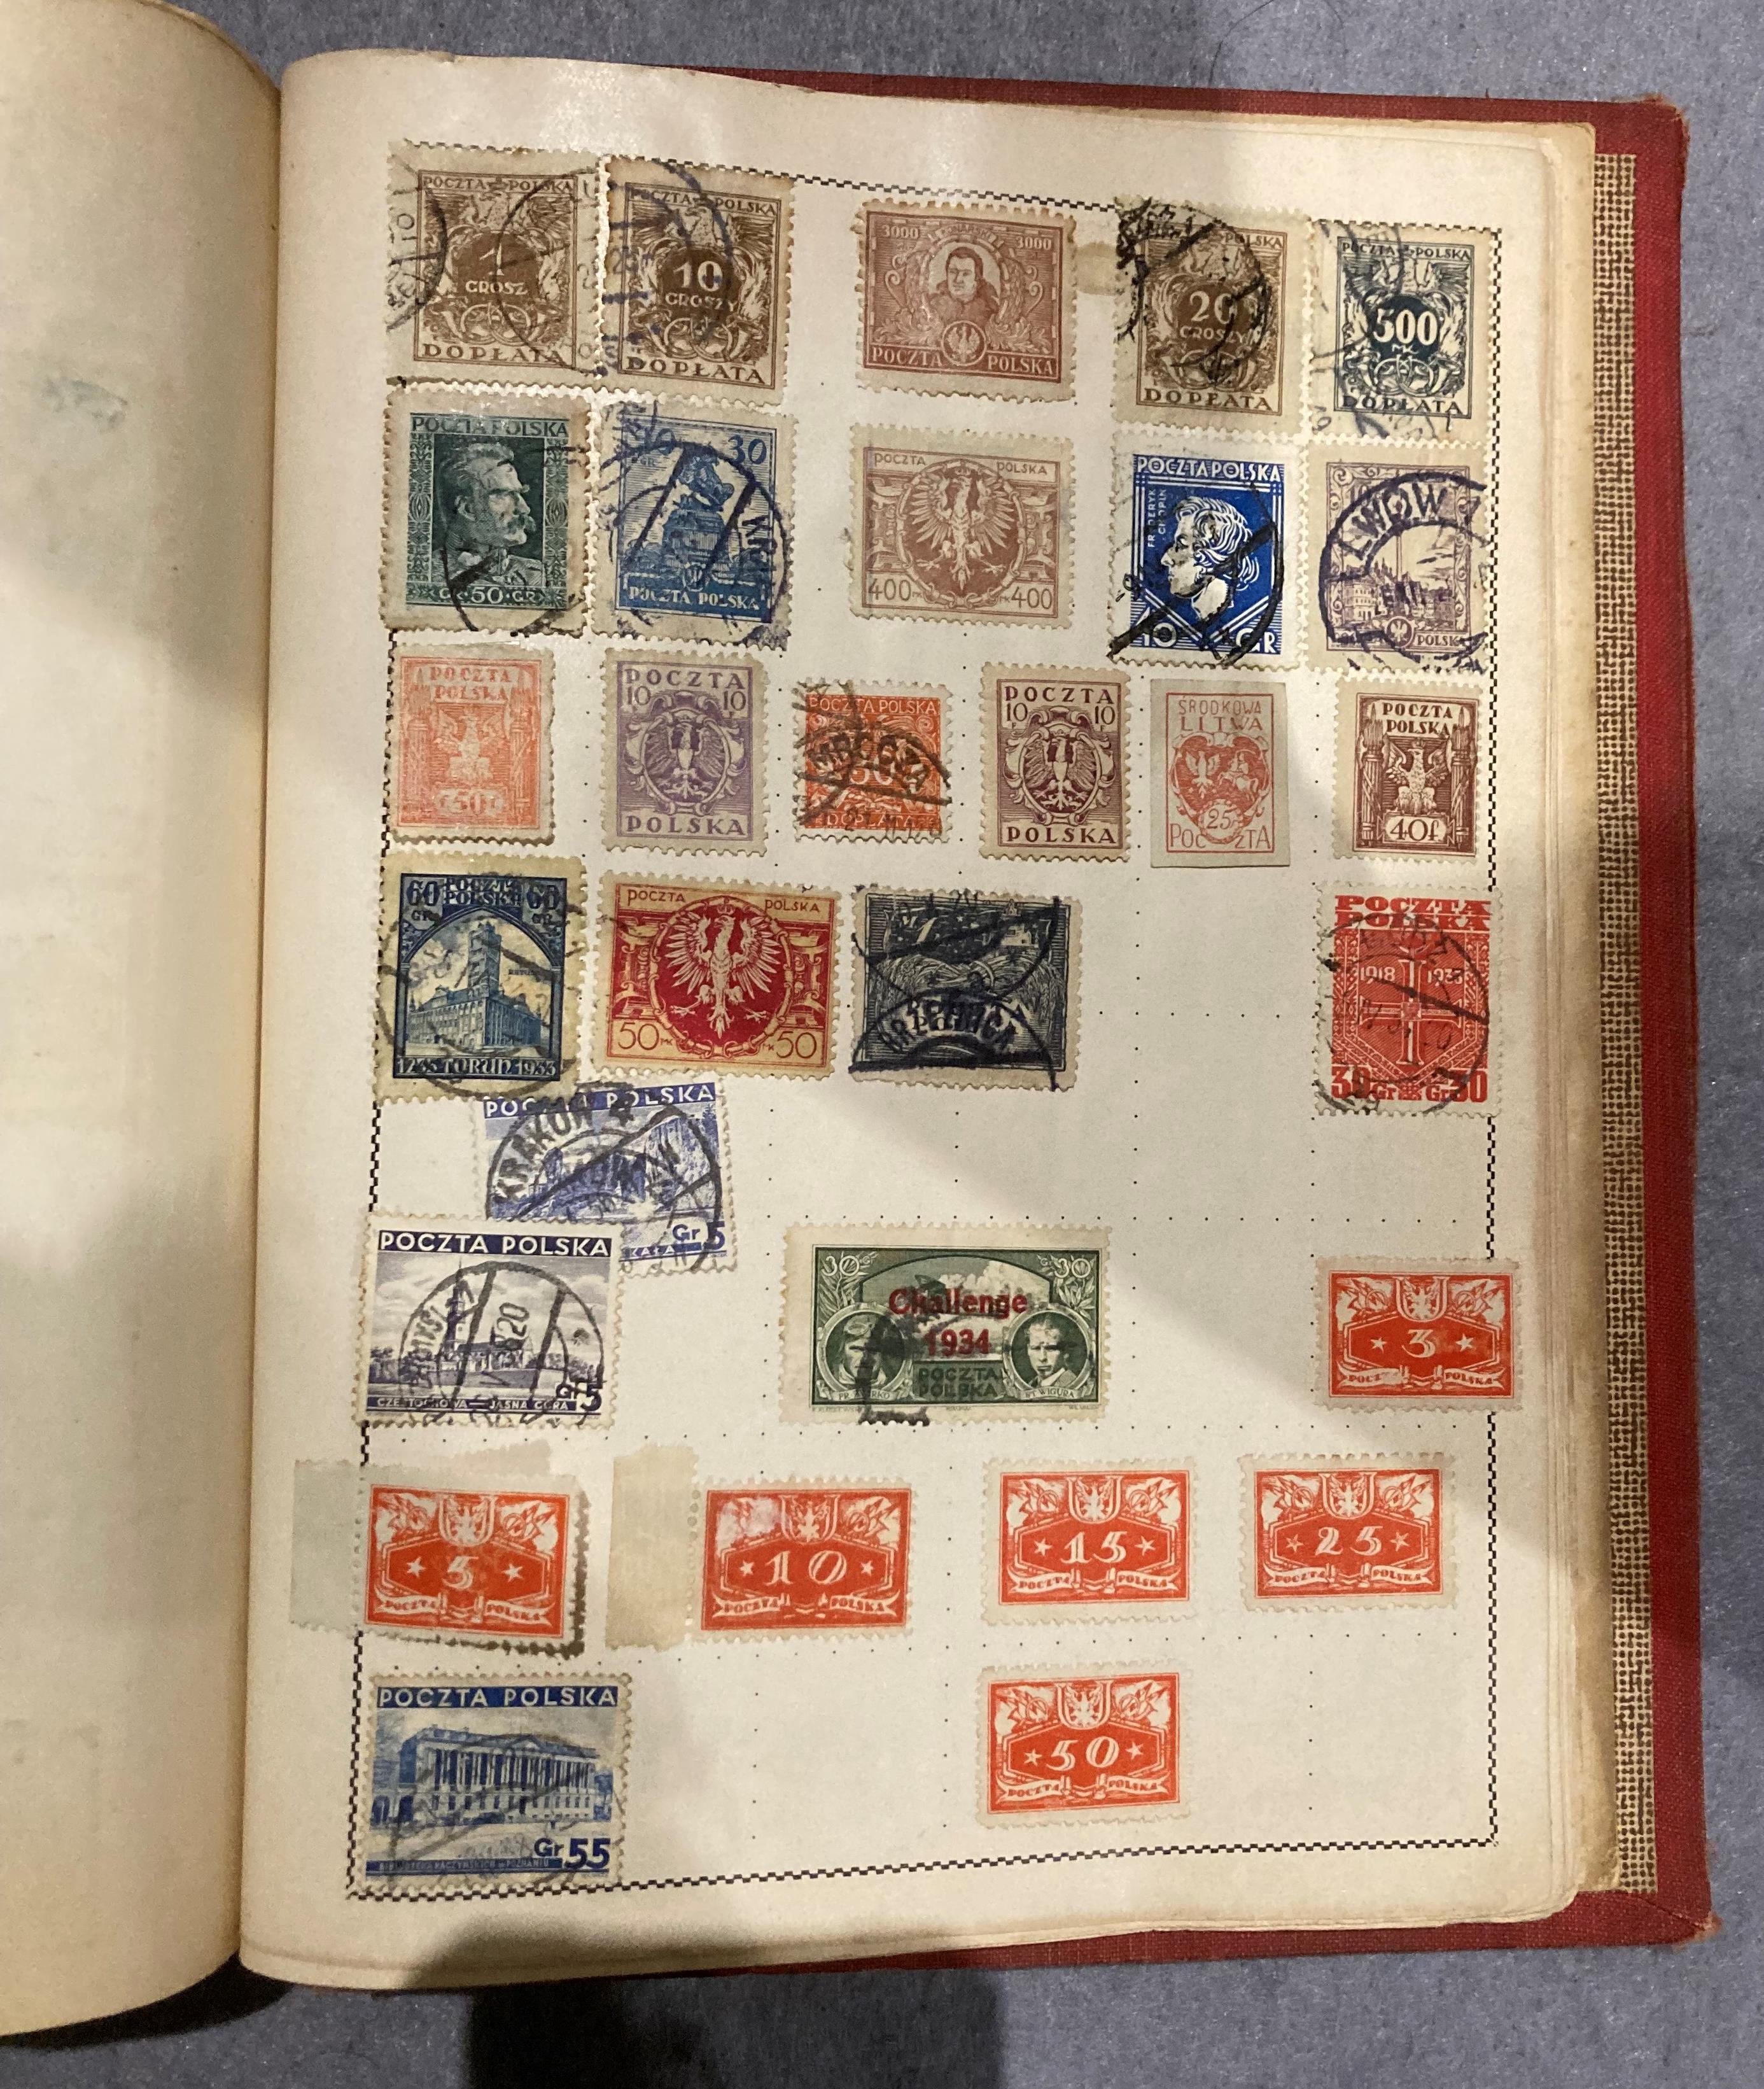 The Movaleaf illustrated stamp album and contents - assorted world stamps and contents to tray - - Image 6 of 7